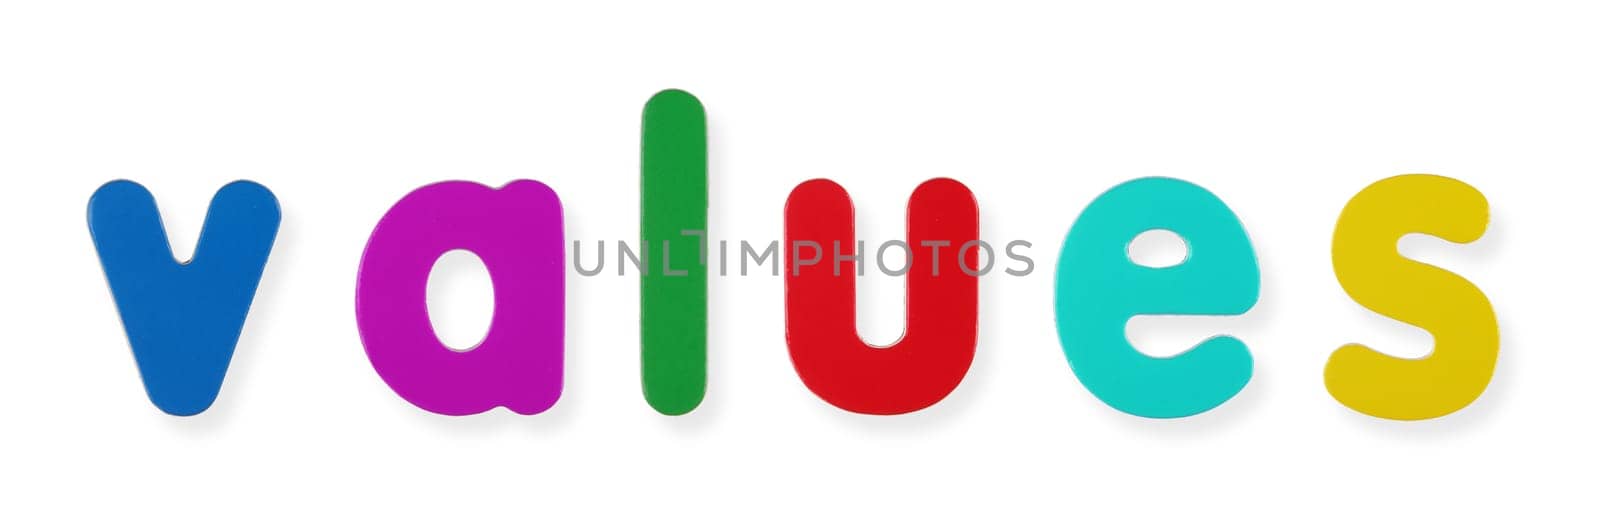 A values word in coloured magnetic letters on white with clipping path to remove shadow